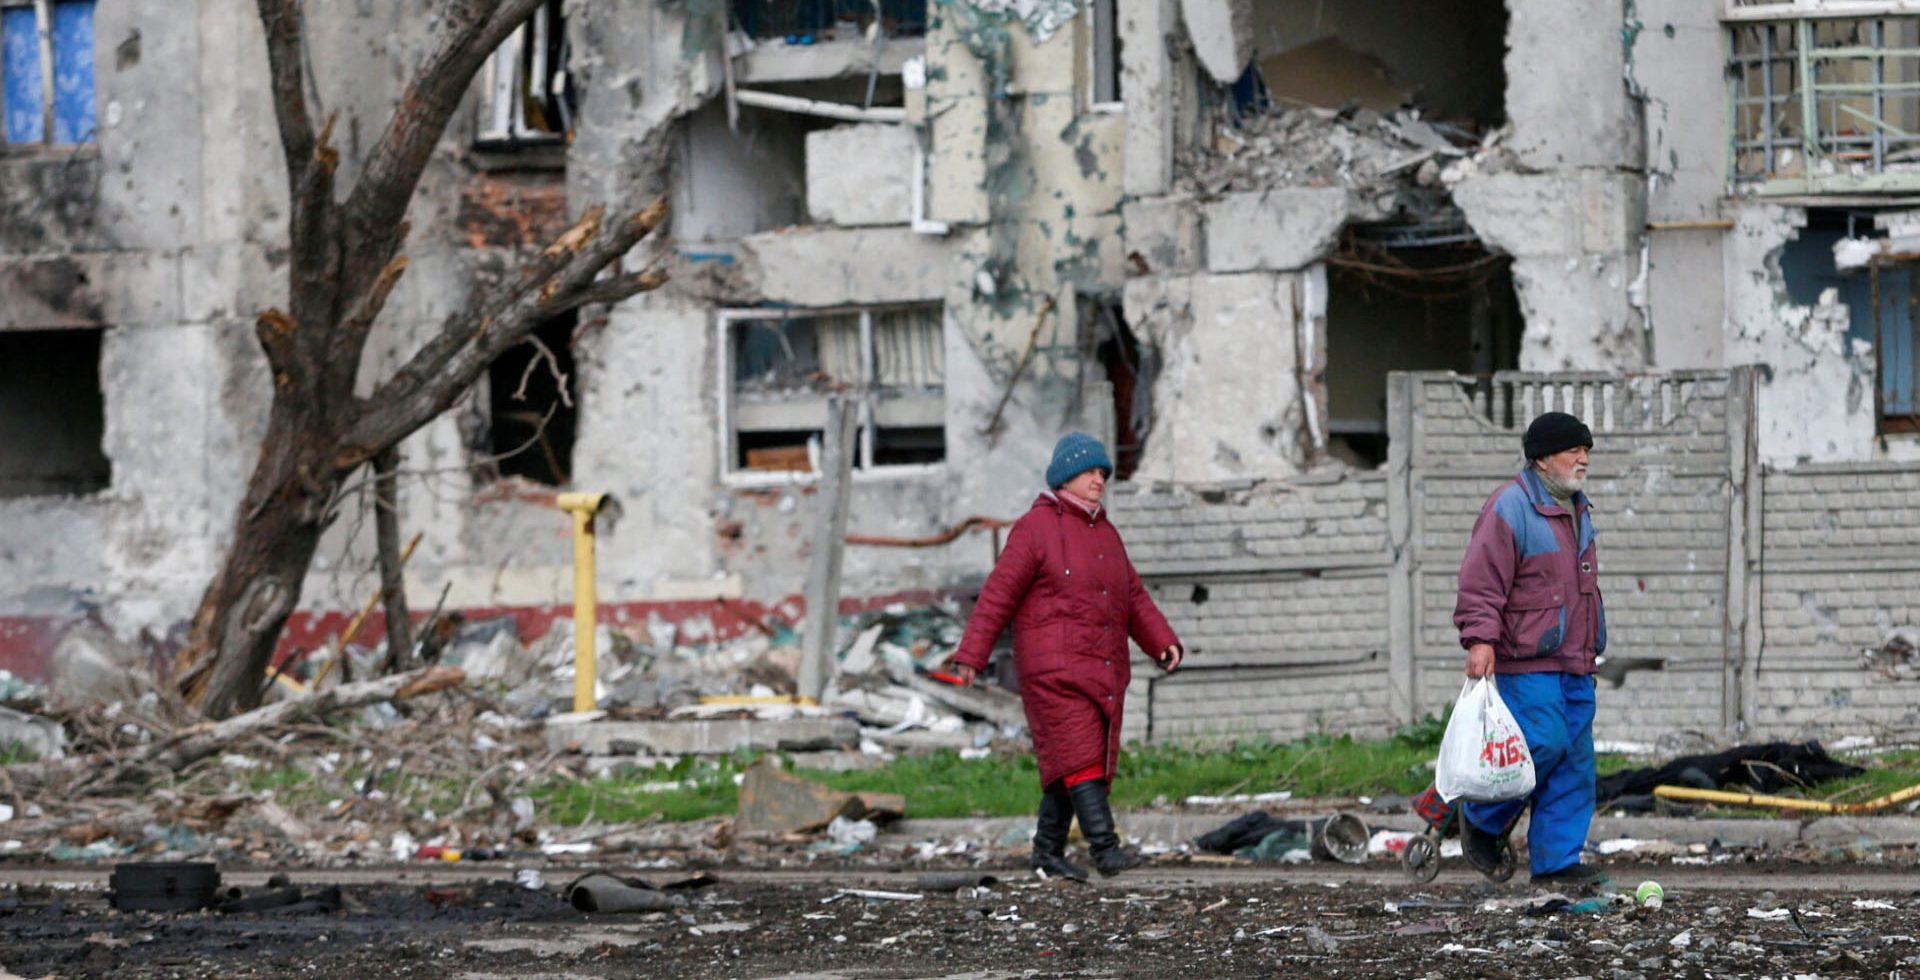 A man and a woman walk by destroyed residential buildings in Ukraine